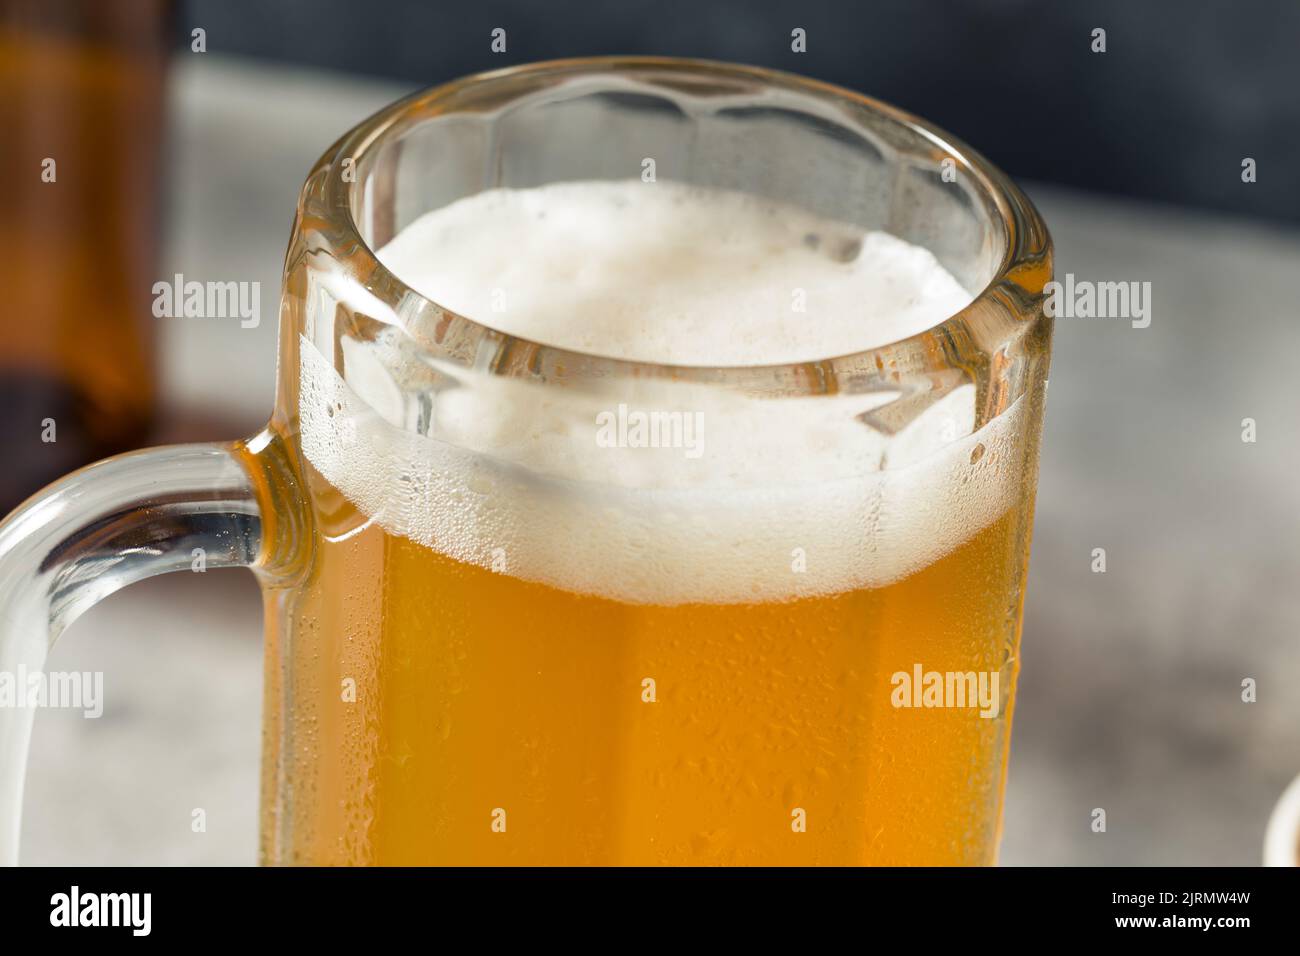 Boozy Refreshing Cold Craft Beer in a Mug with Nuts Stock Photo